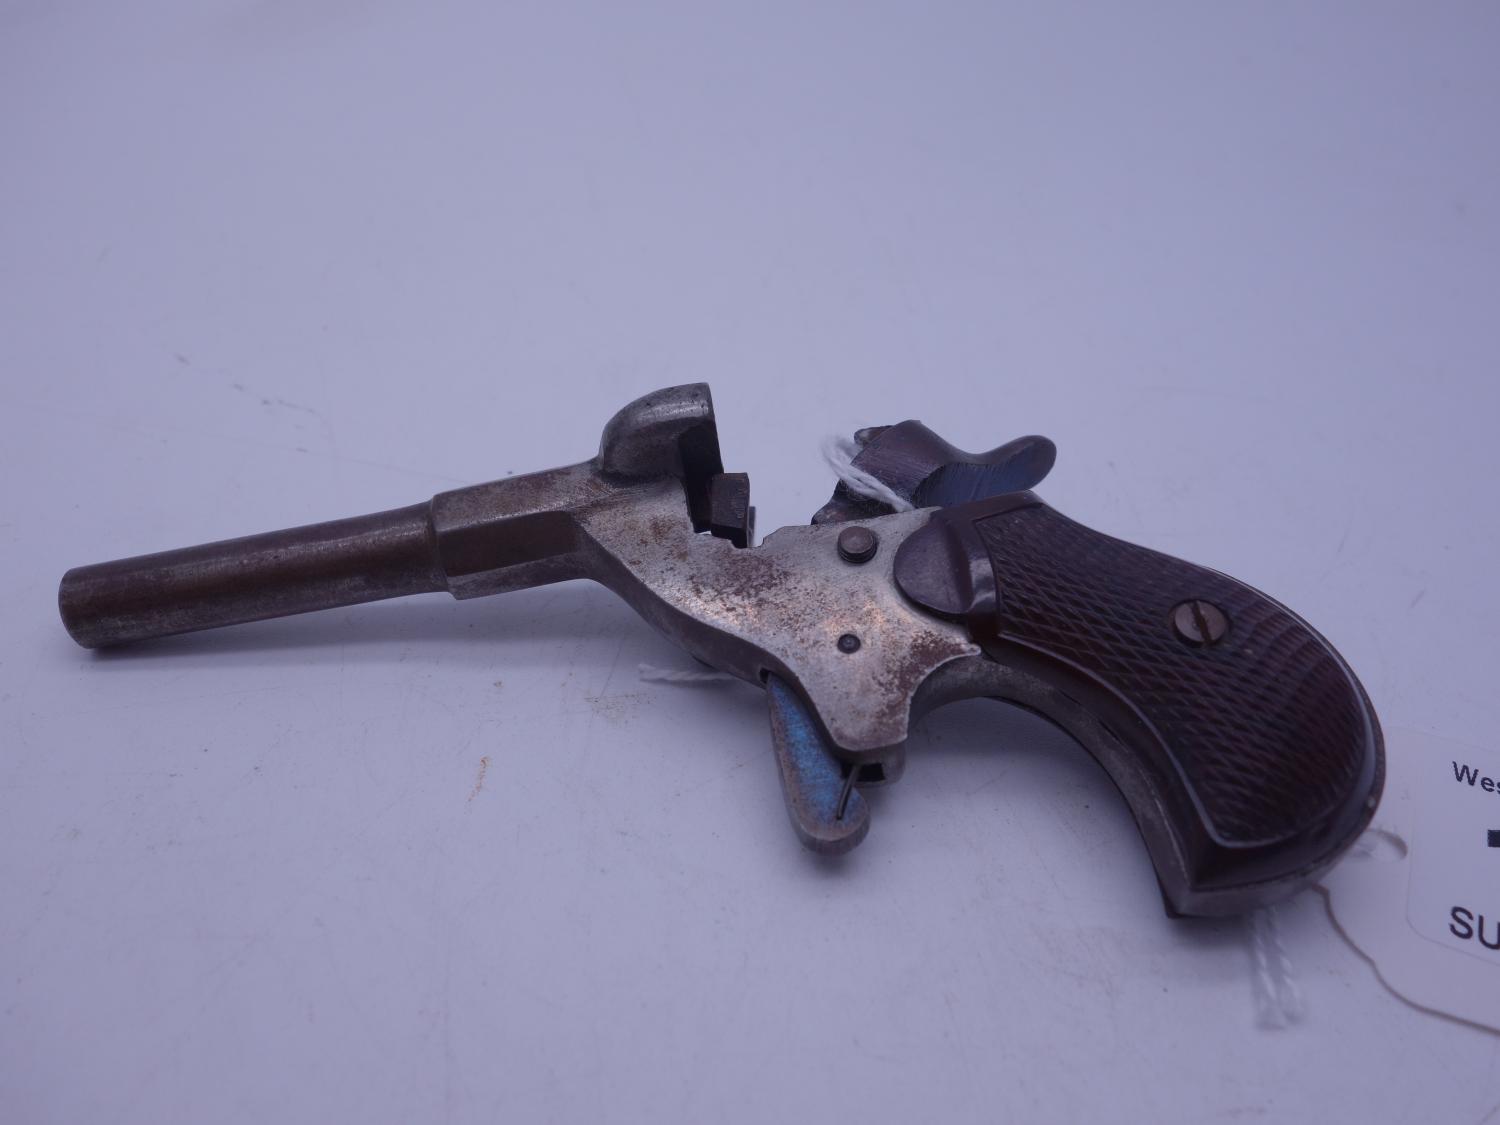 Edwardian period small starting pistol 4.5" long probably German, - Image 3 of 3